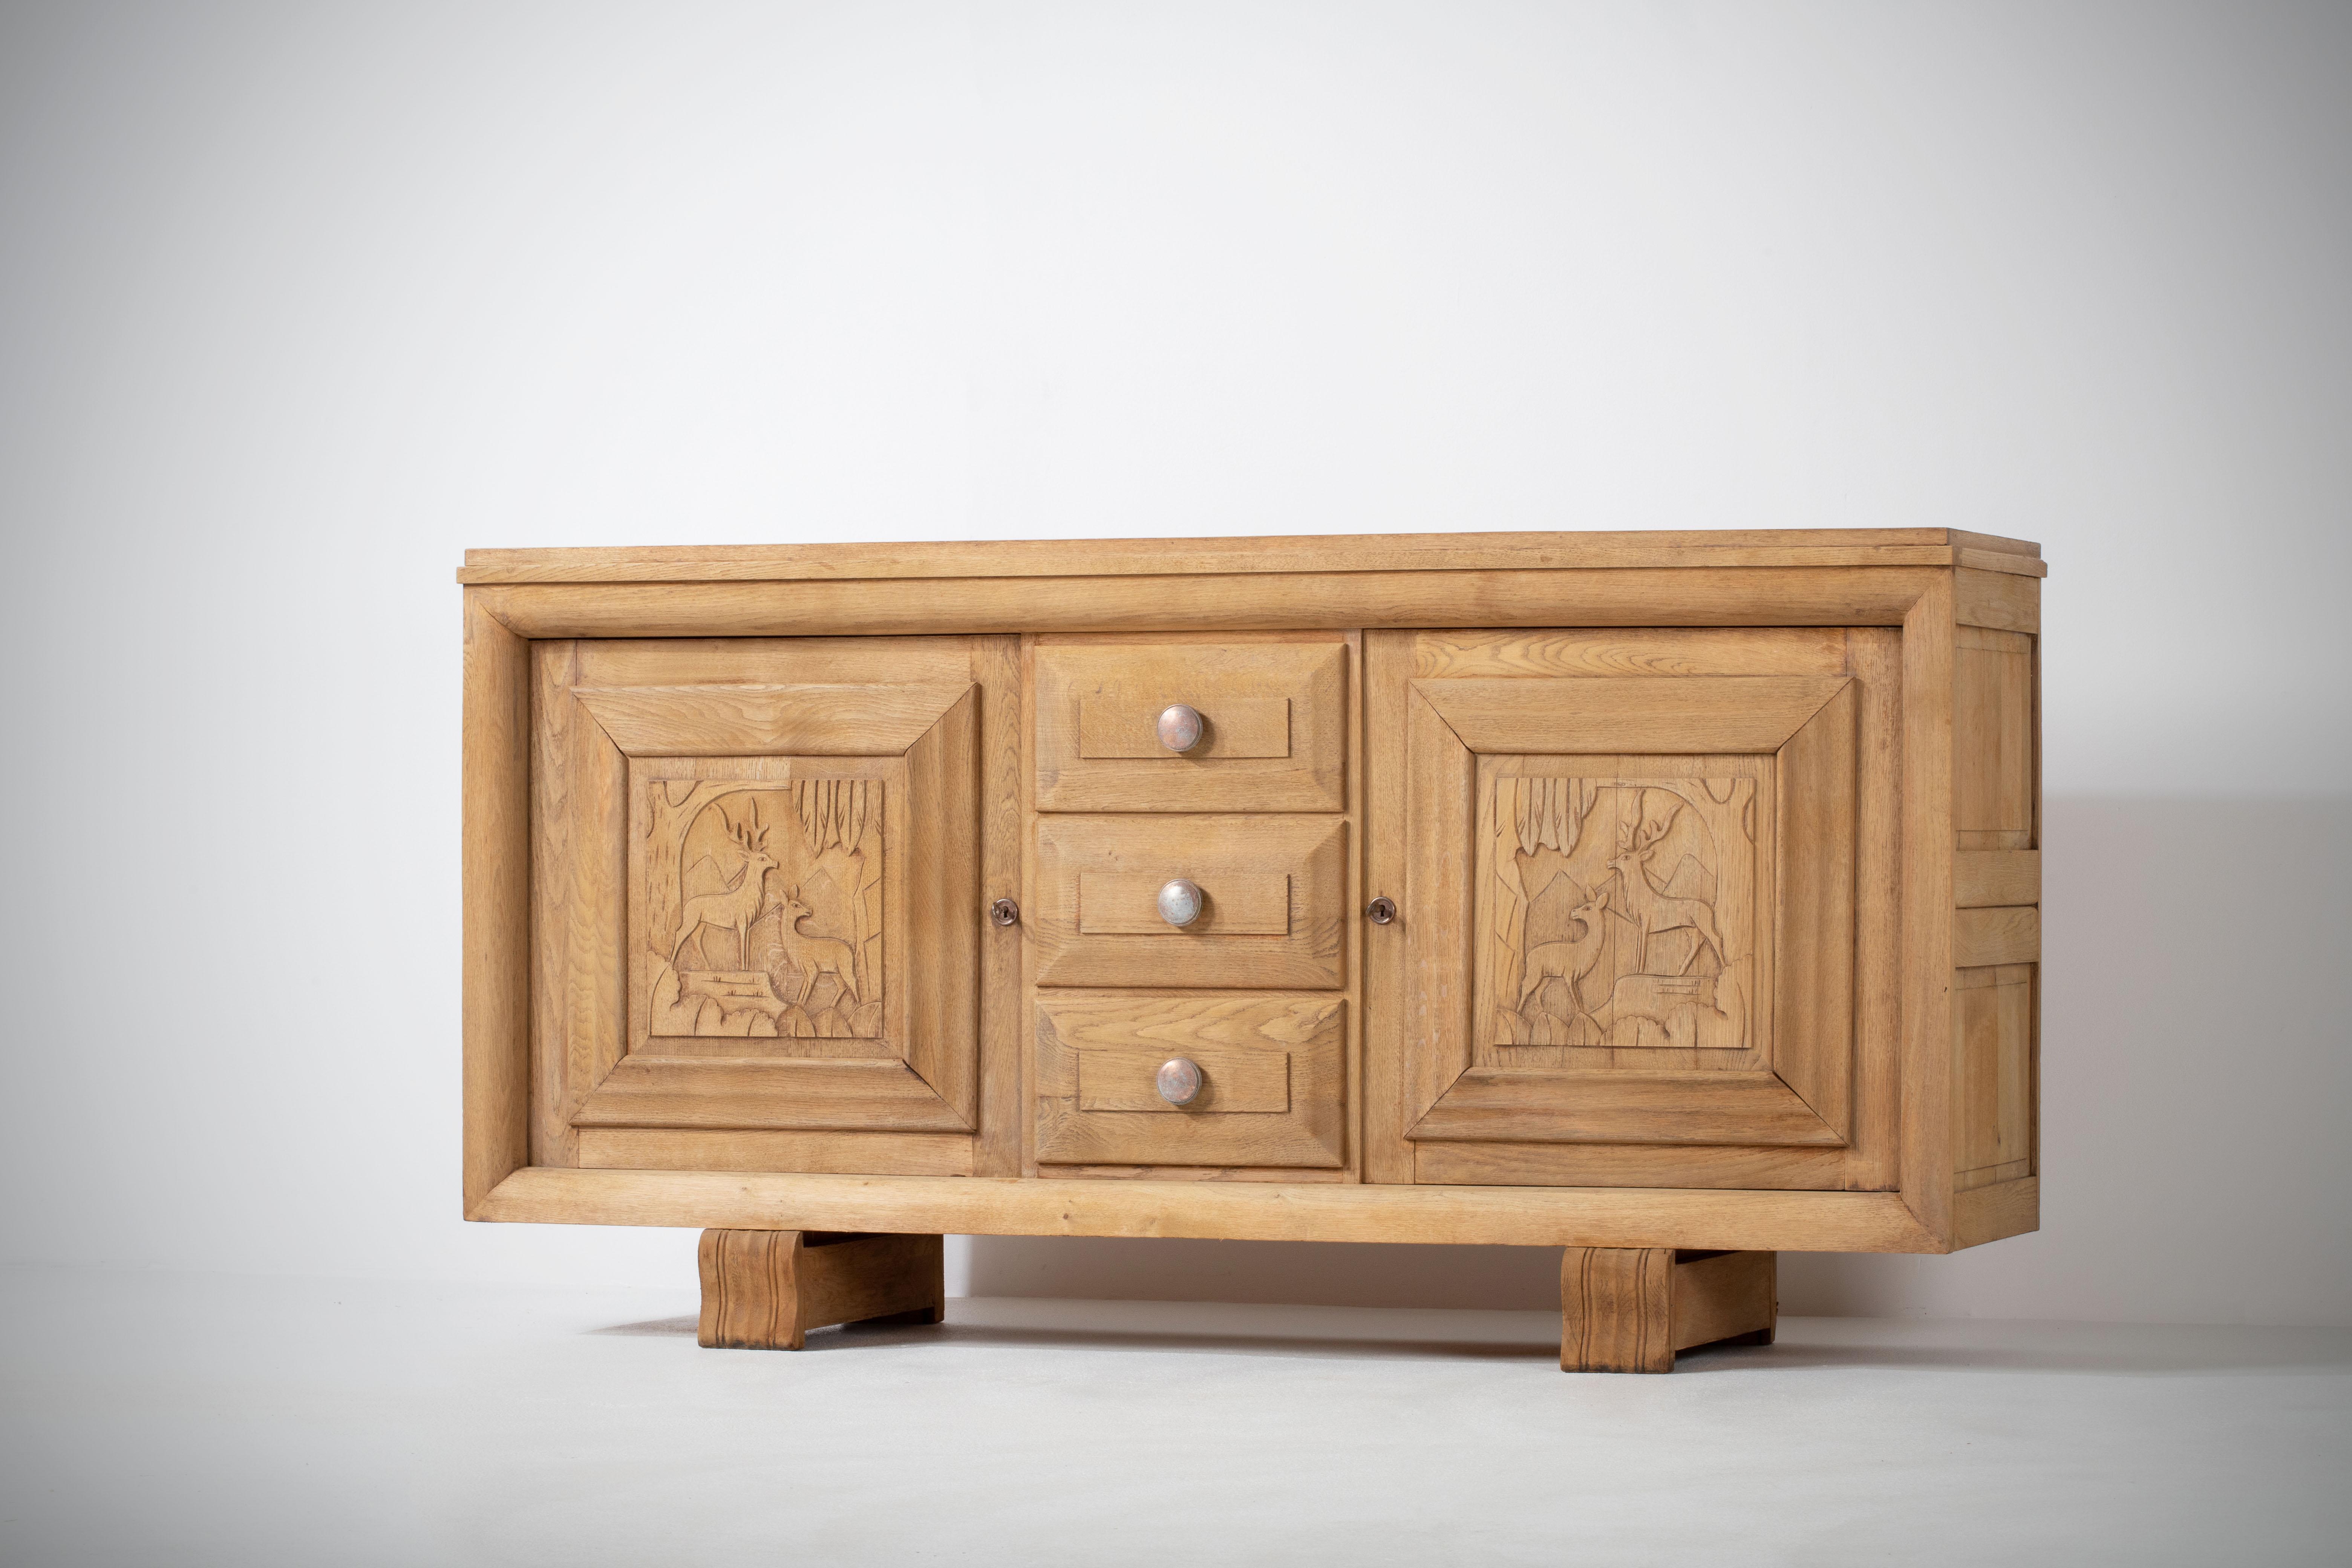 Very elegant credenza in solid oak, France, 1940s.
Art Deco brutalist sideboard. 
The credenza consists of two storage facilities covered with handcarved hunting scene designed doors and a column of drawers.
The refined wooden structures on the